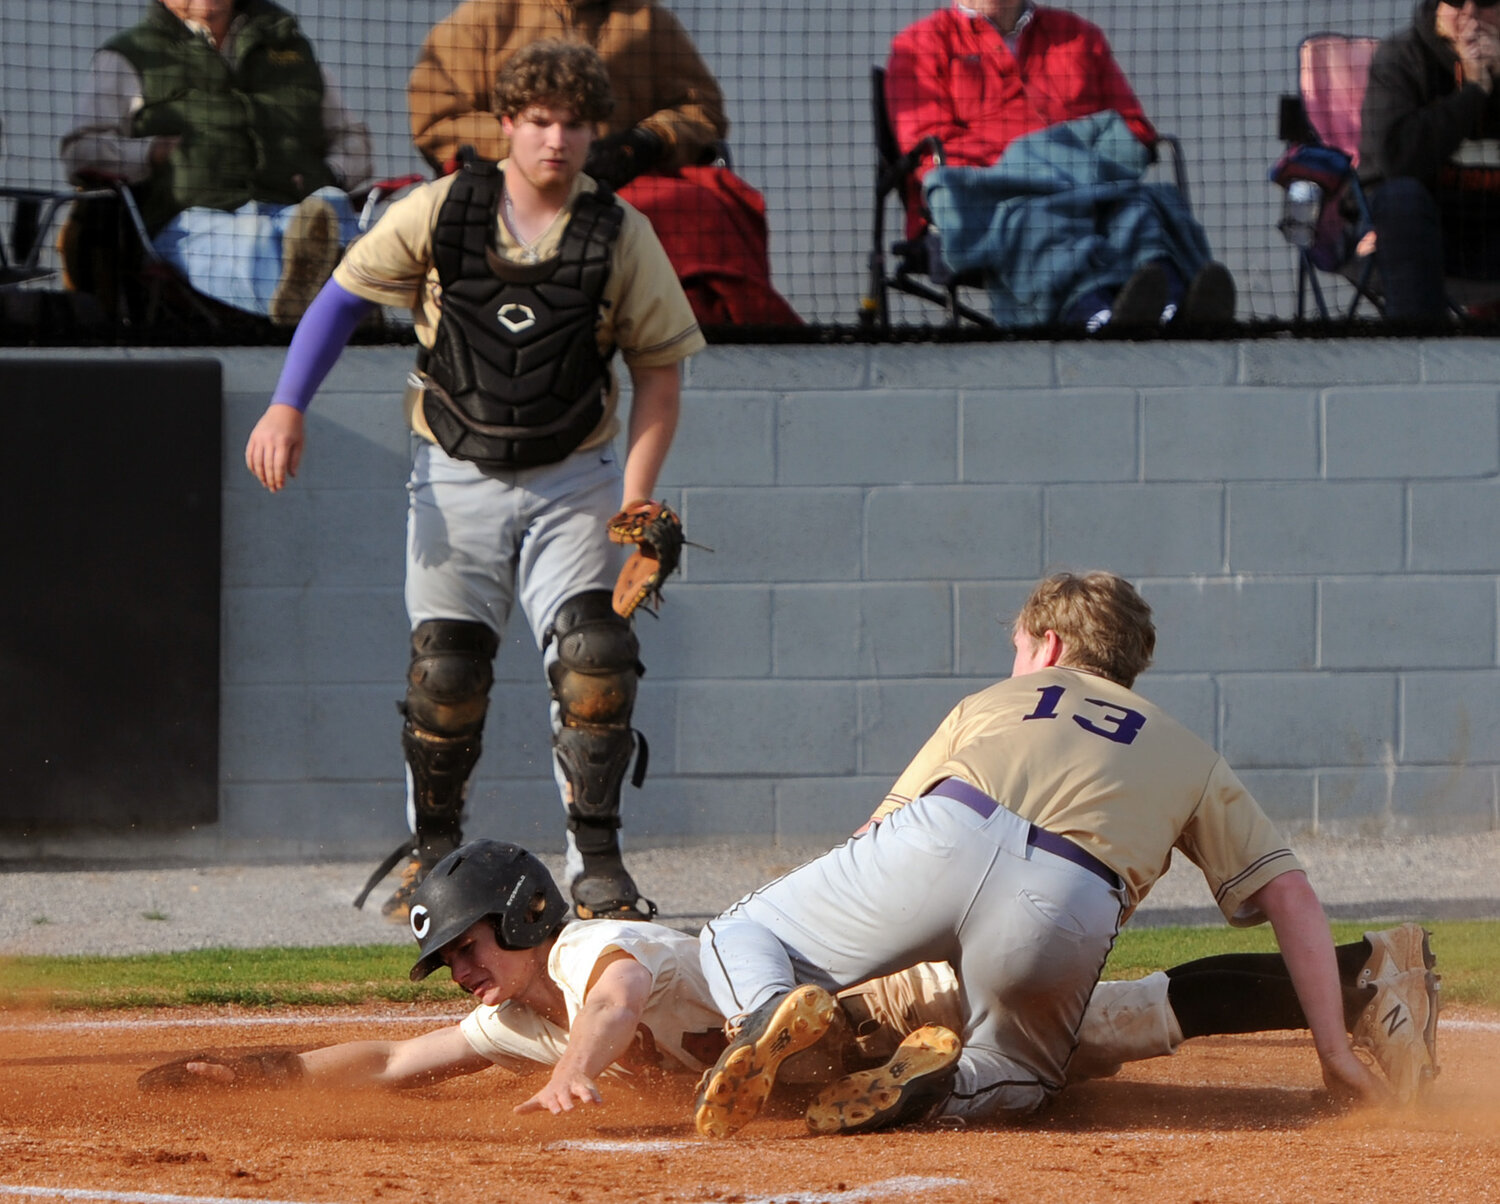 Blaine Paschal covers home after a passed ball and swipes a Cornersville base runner for an out.